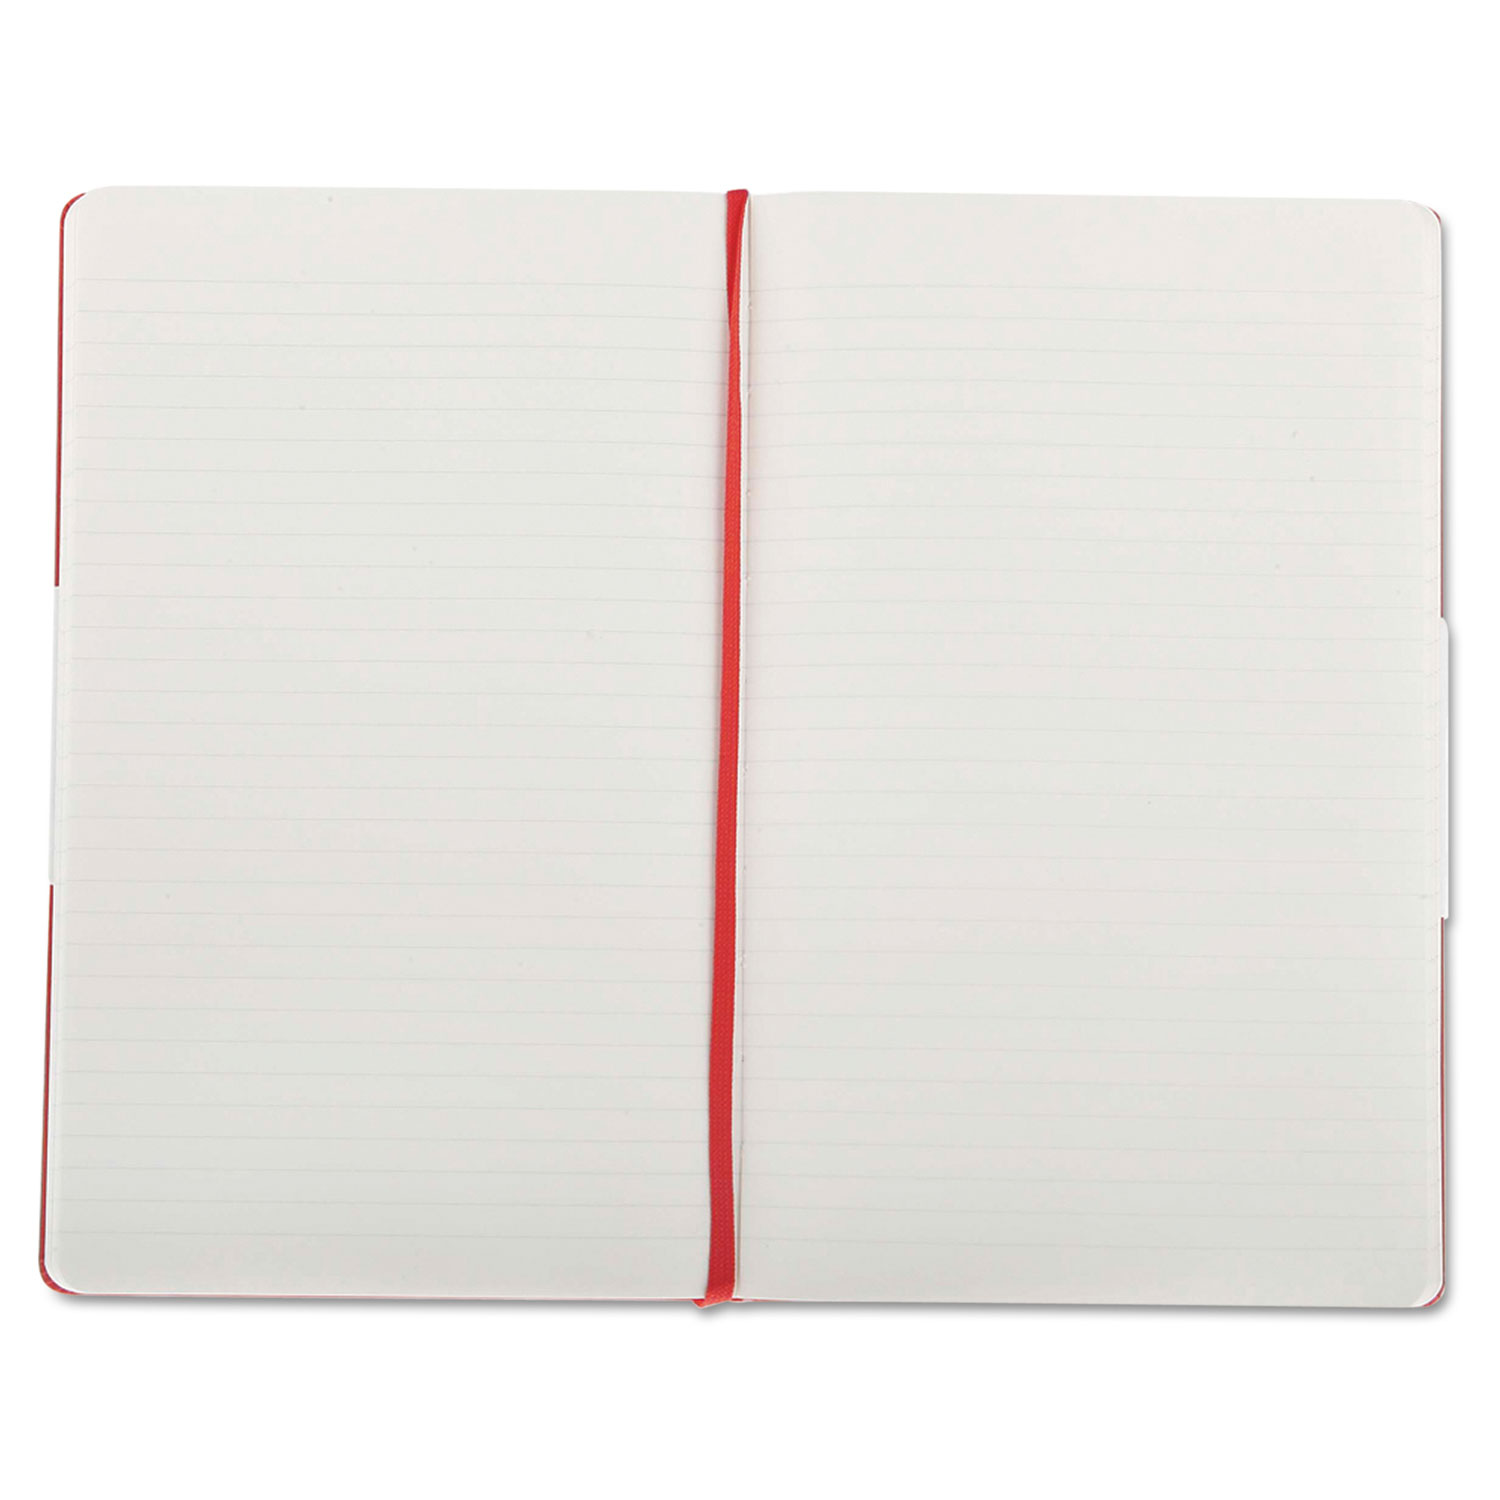 Ruled Classic Notebook, 8 1/4 x 5, Red Cover, 240 Sheets